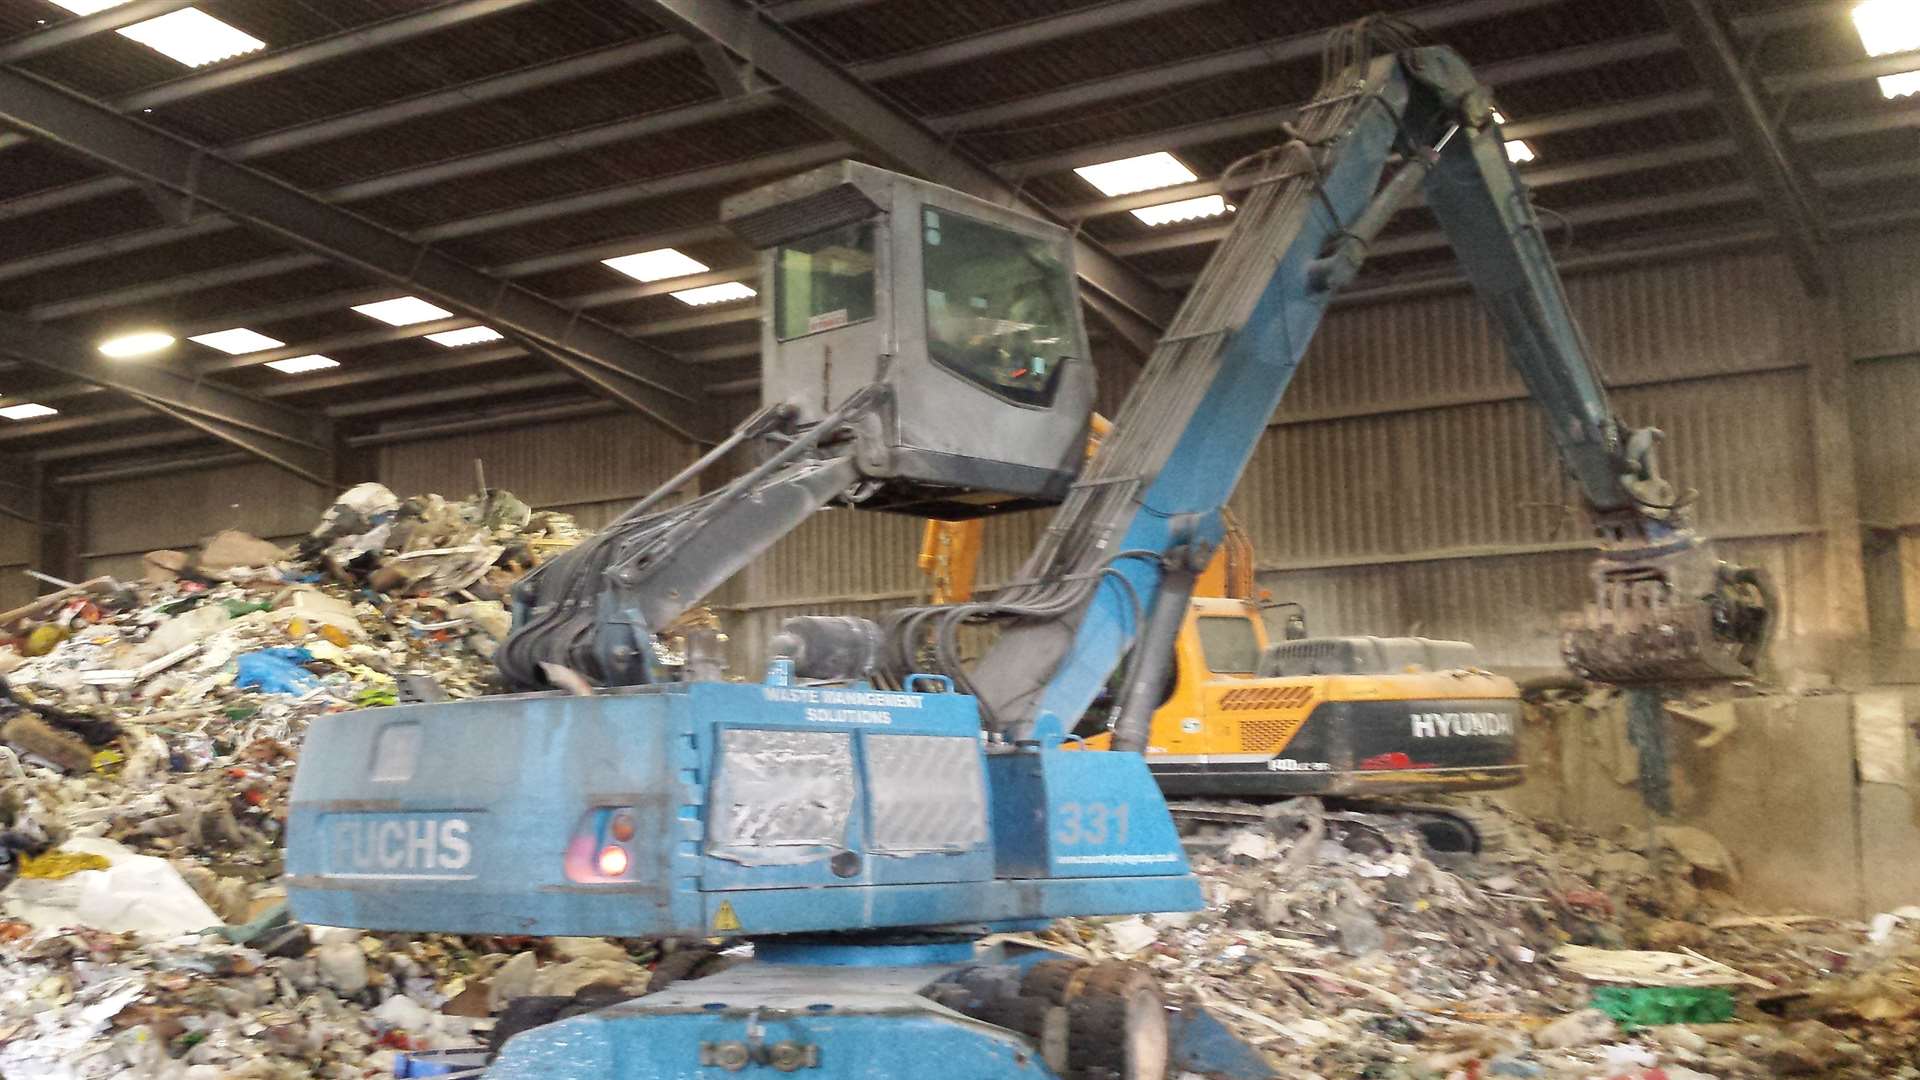 Countrystyle deals with huge amounts of residual waste after Christmas